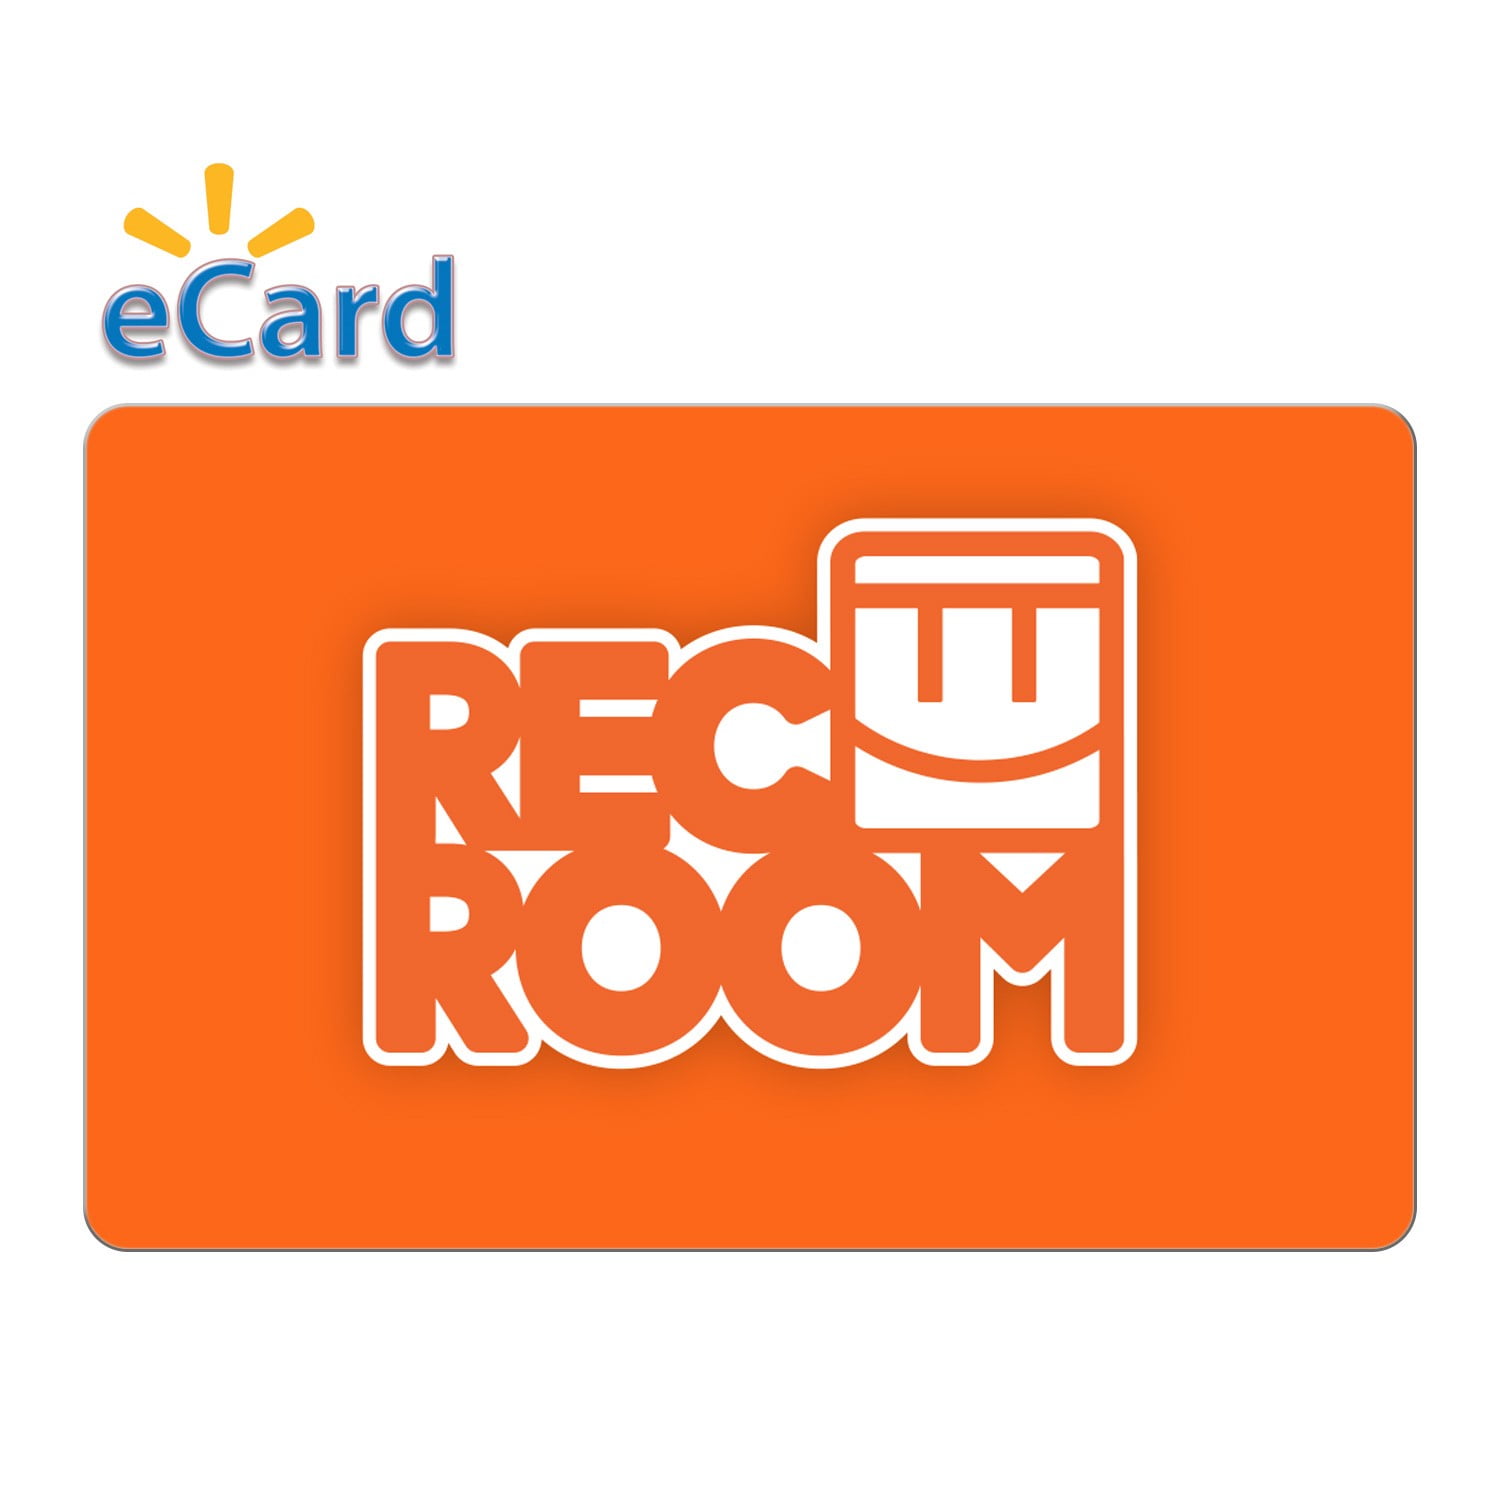 Giving away a $25 REC ROOM GIFT CARD!!! Then playing REC ROOM!!! JUICERS  EPIC POGGERS!!! 